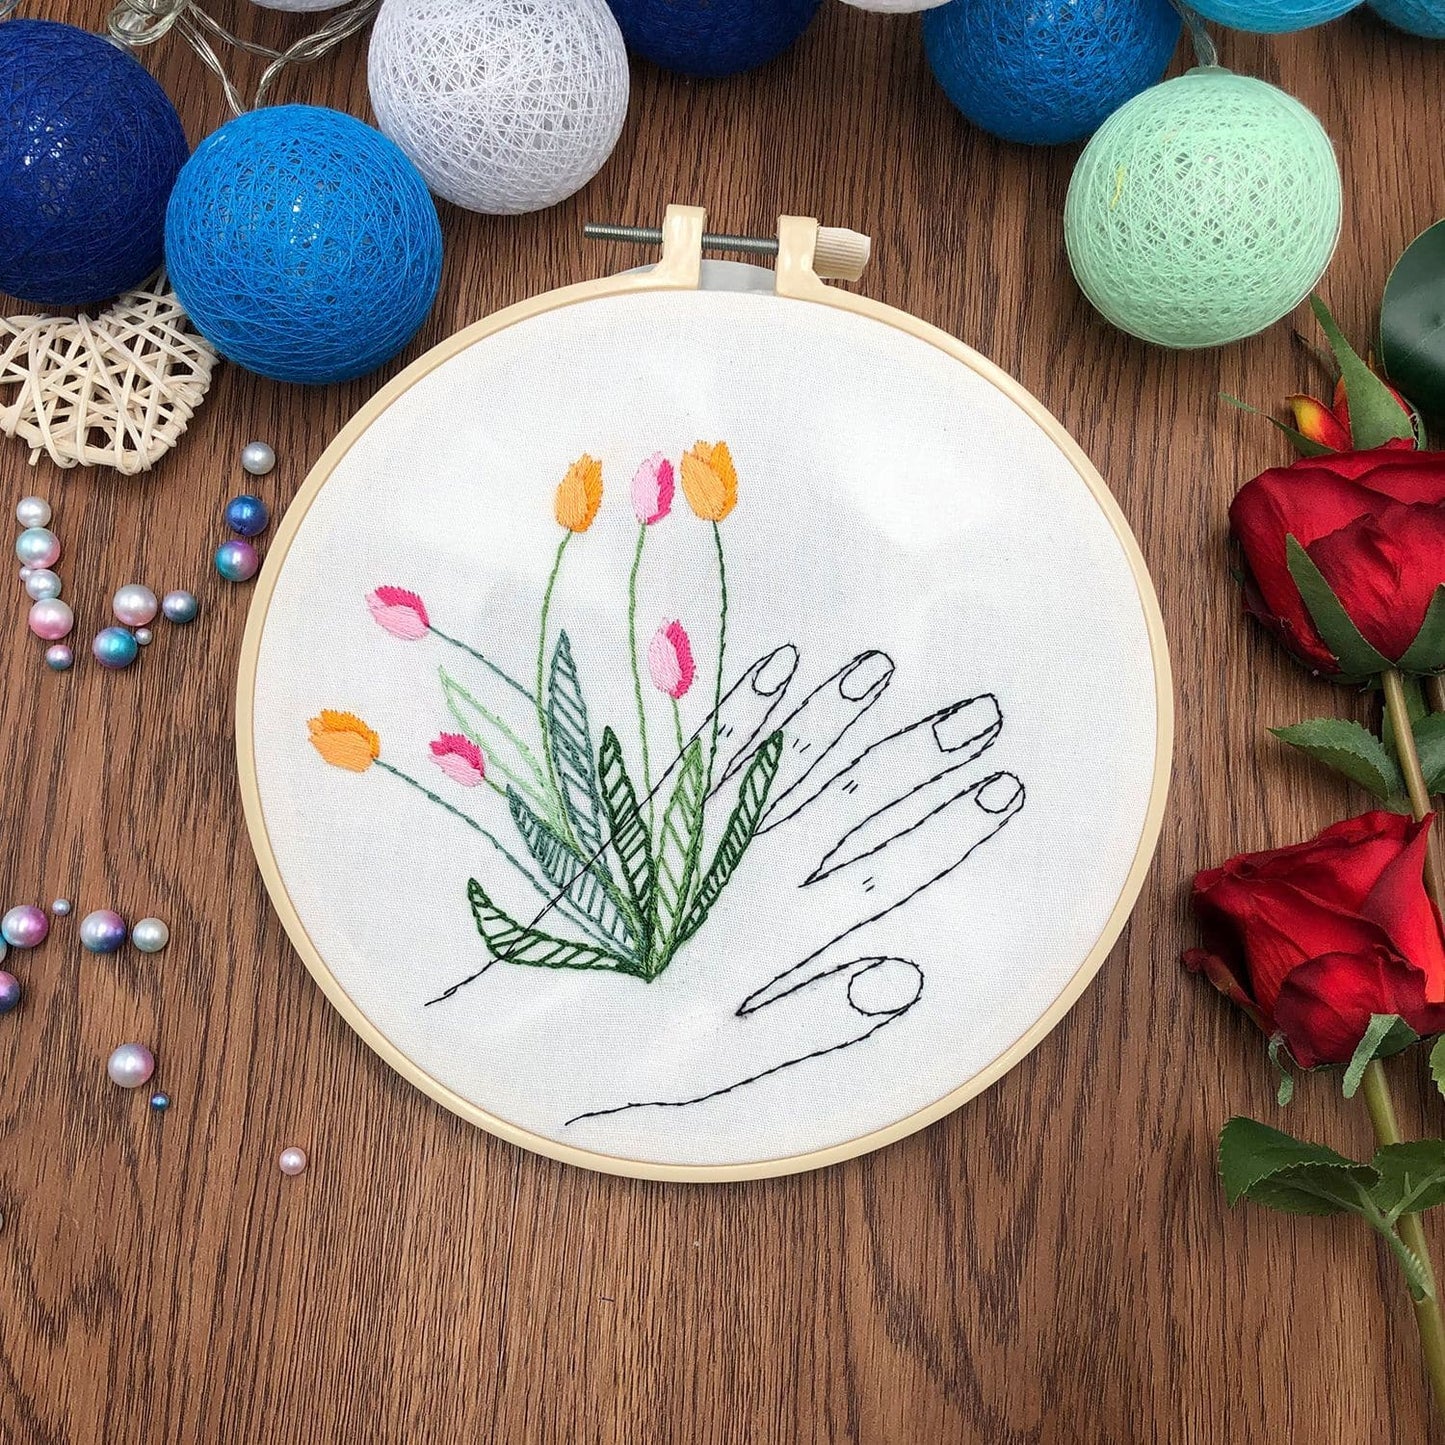 "The hand that holds the flower" - embroidery ktclubs.com